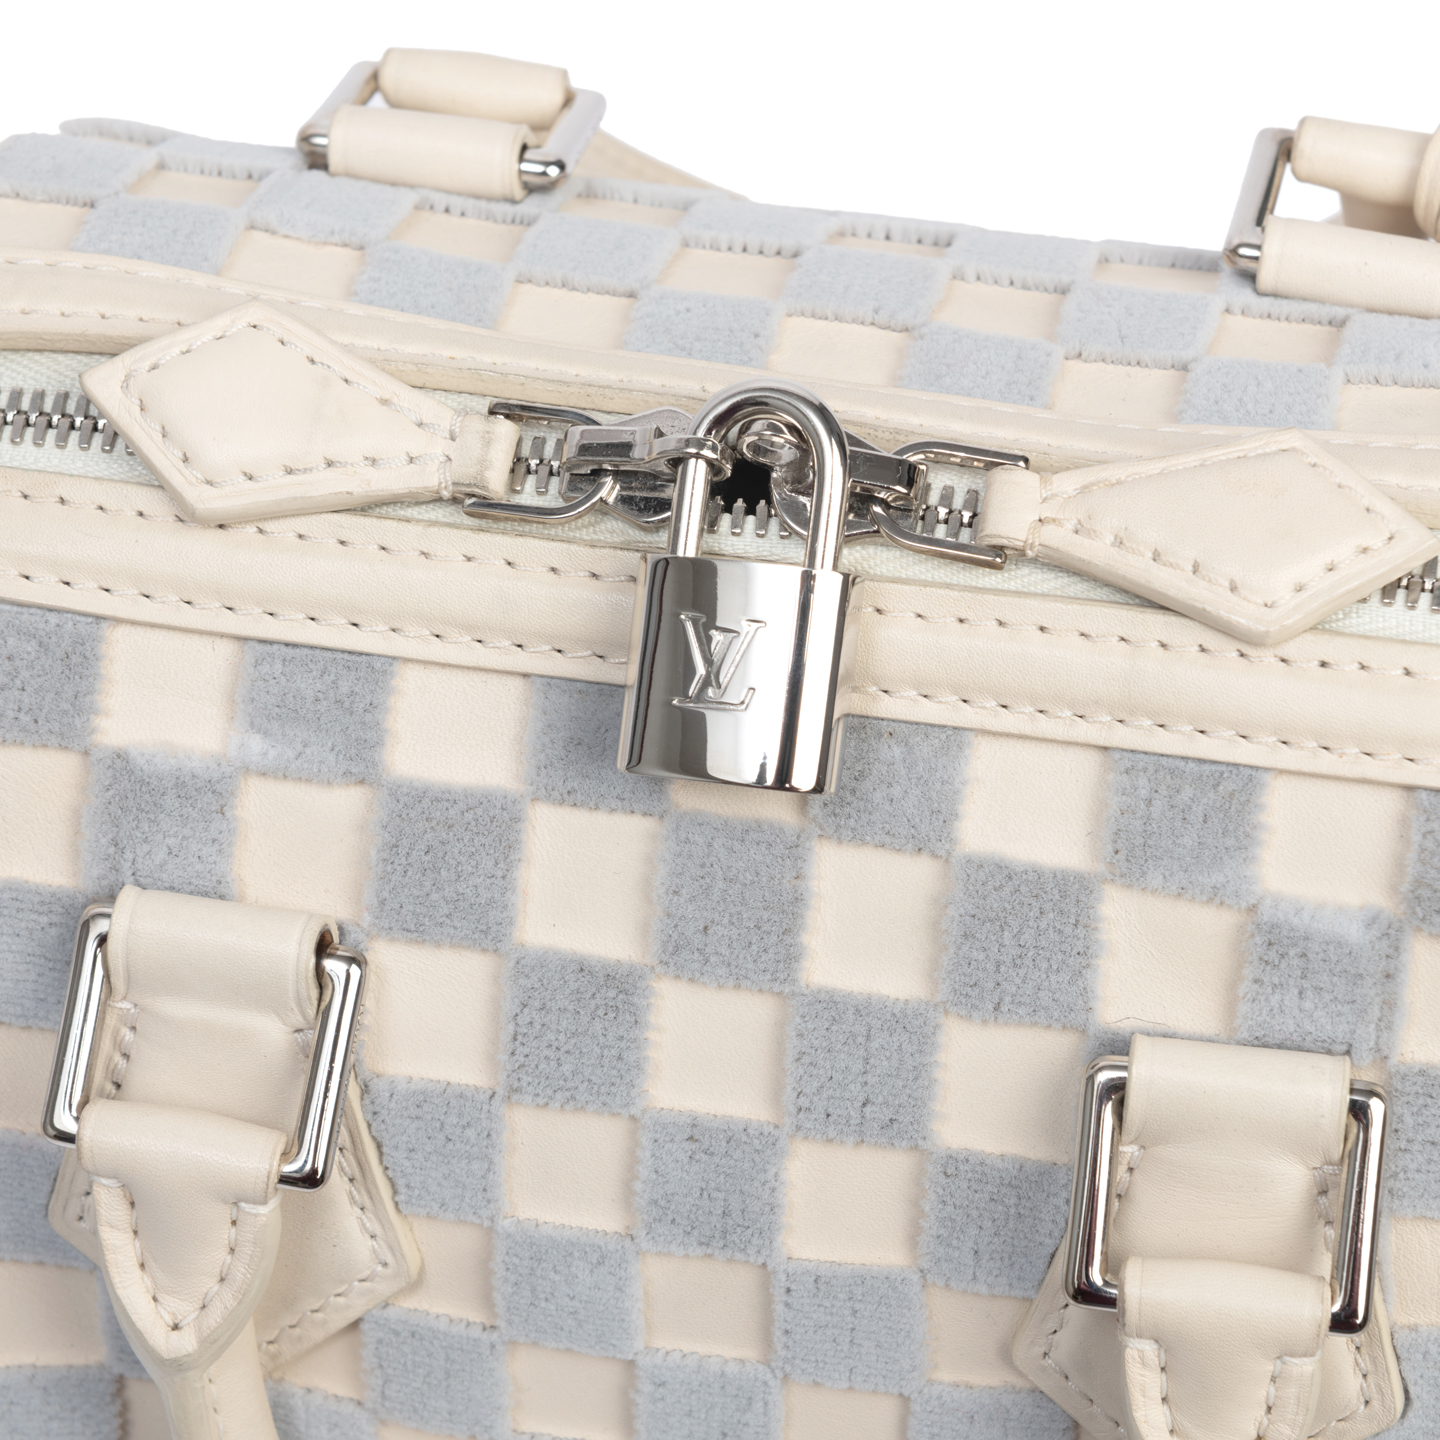 Louis Vuitton Limited Edition Gris Suede and Leather Speedy Cube Illusion  Bag - Lux - Greenwald Antiques